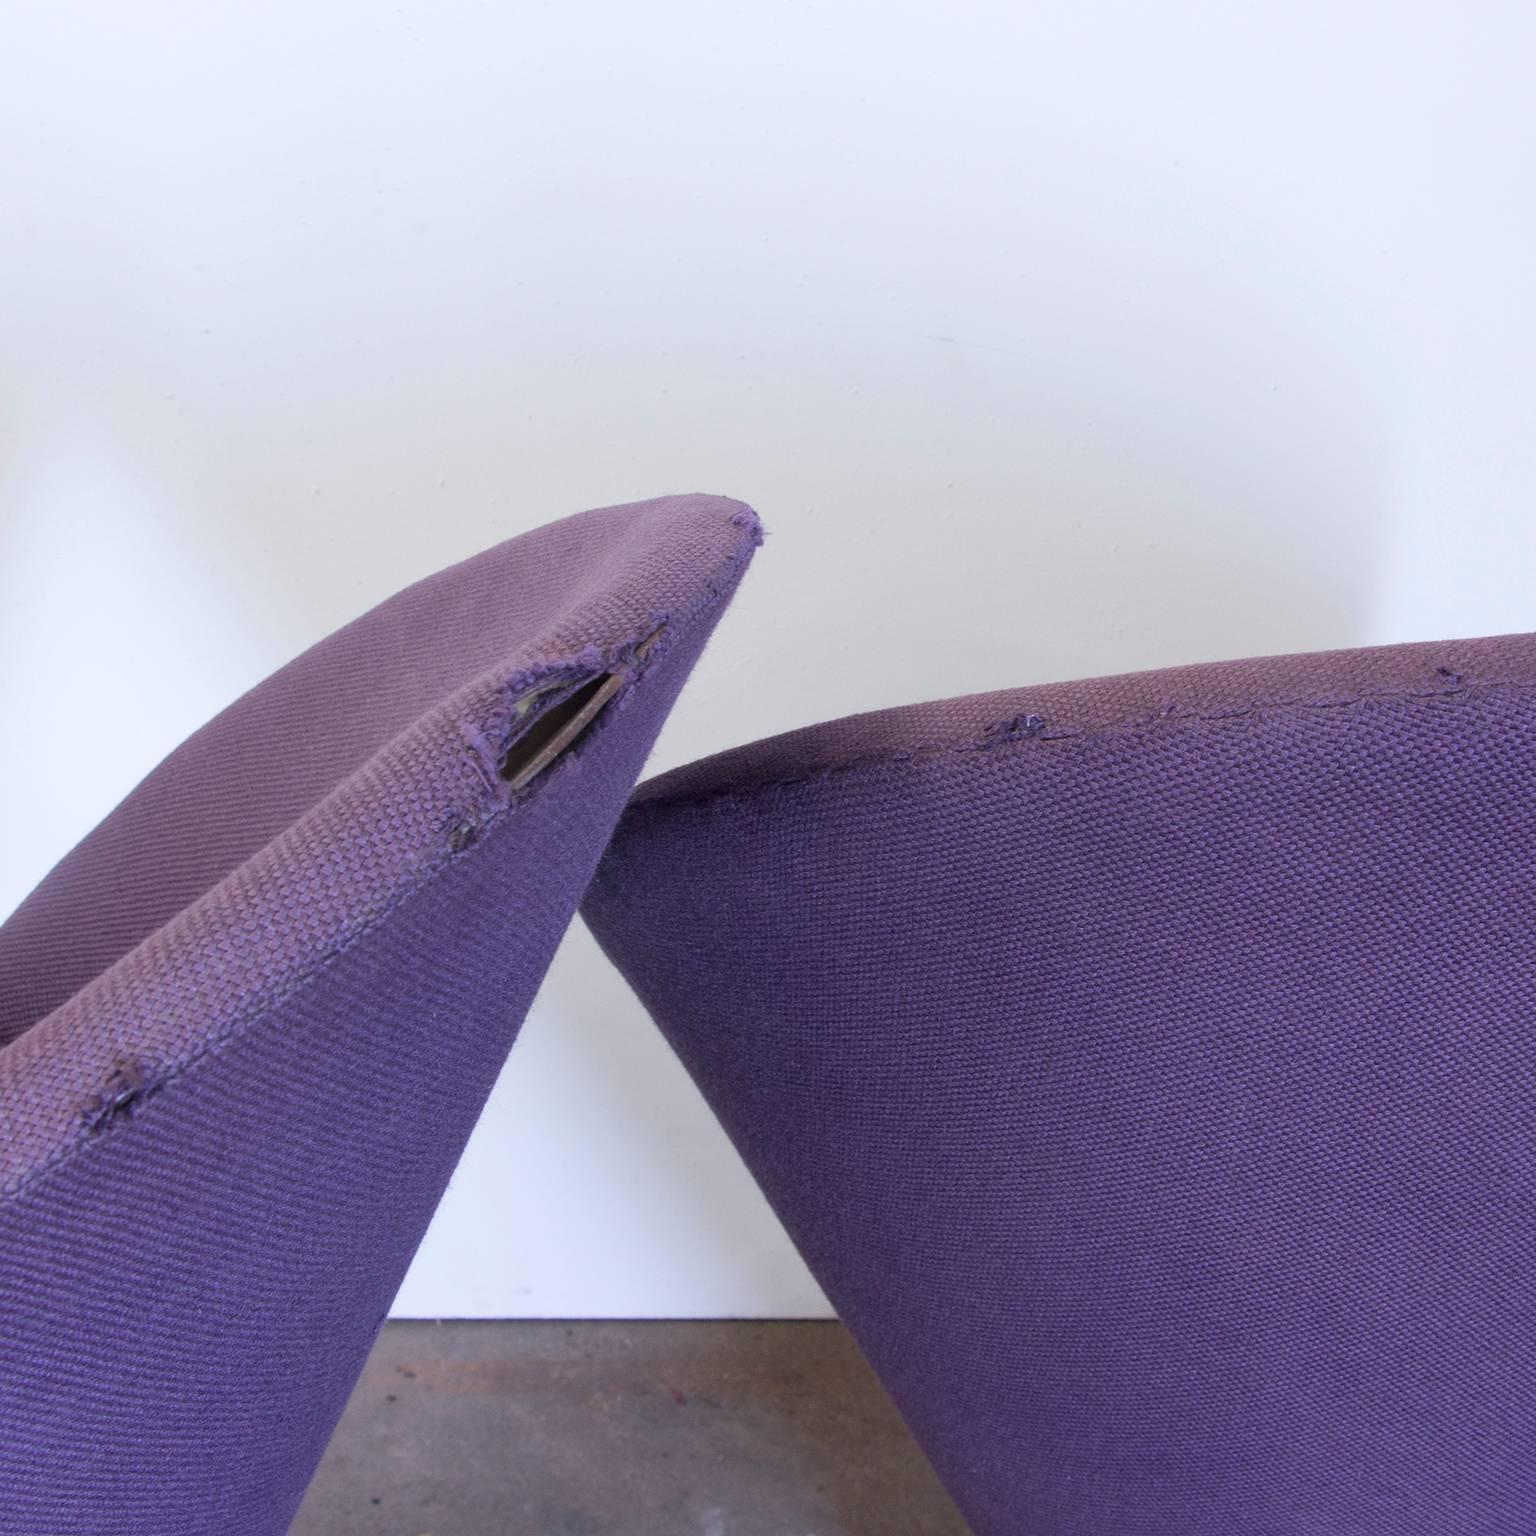 1958, Verner Panton for Rosenthal, Cone Chair in Original Purple Linen Fabric 1